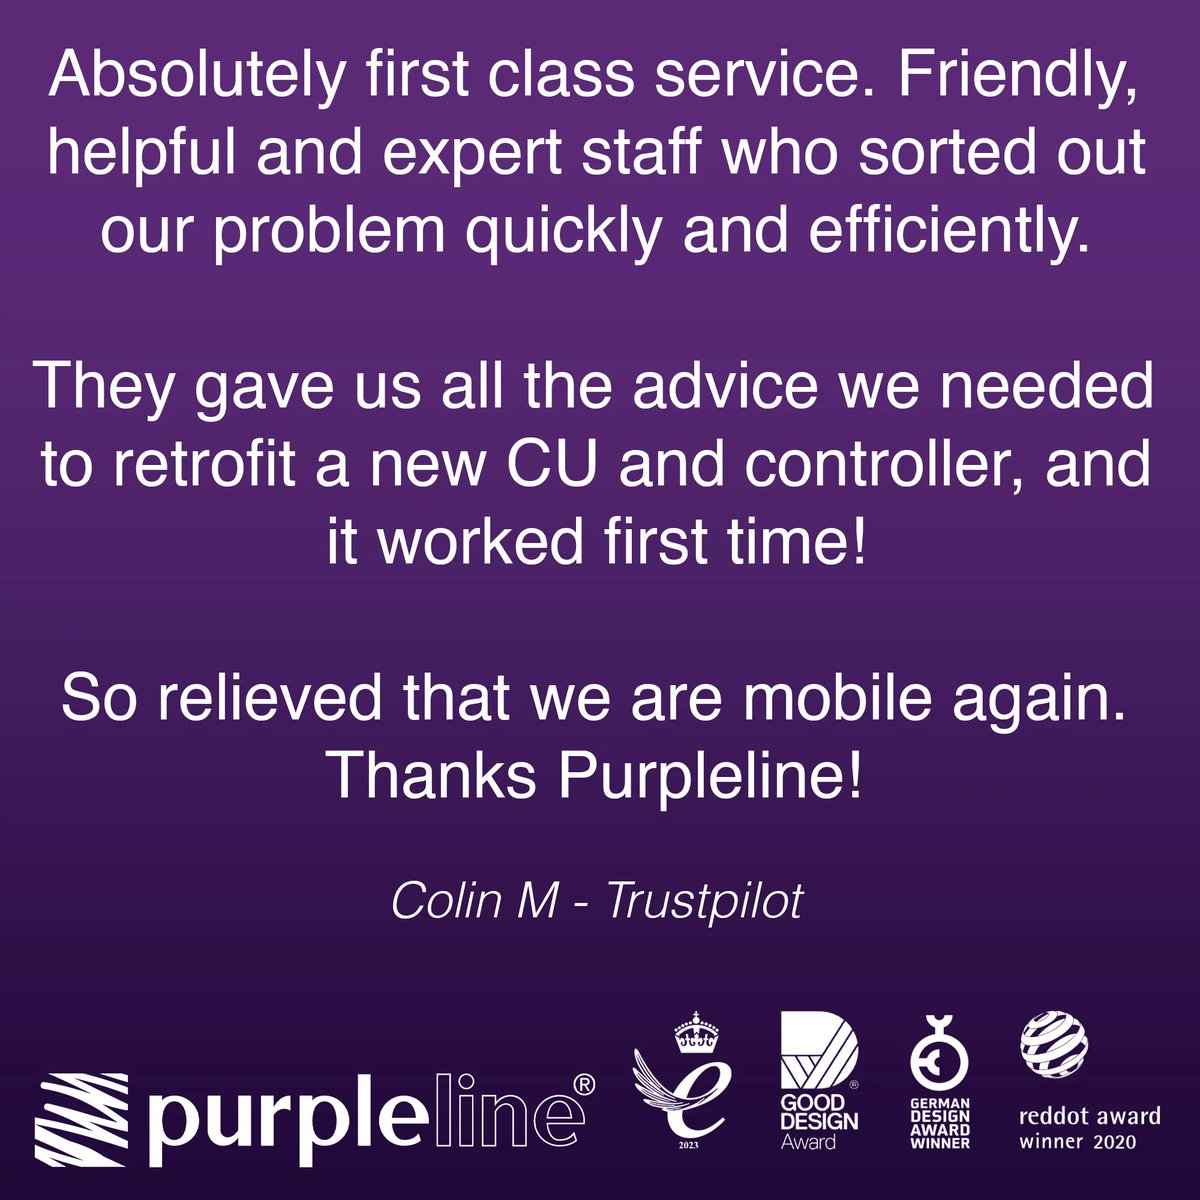 We're really feeling the love ❤️

Find out what makes our customers so happy with our service - choose Purple Line!

#design #innovate #improve #productdesign #invention #designinspiration #leisureaccessories #leisuregear #getoutdoors